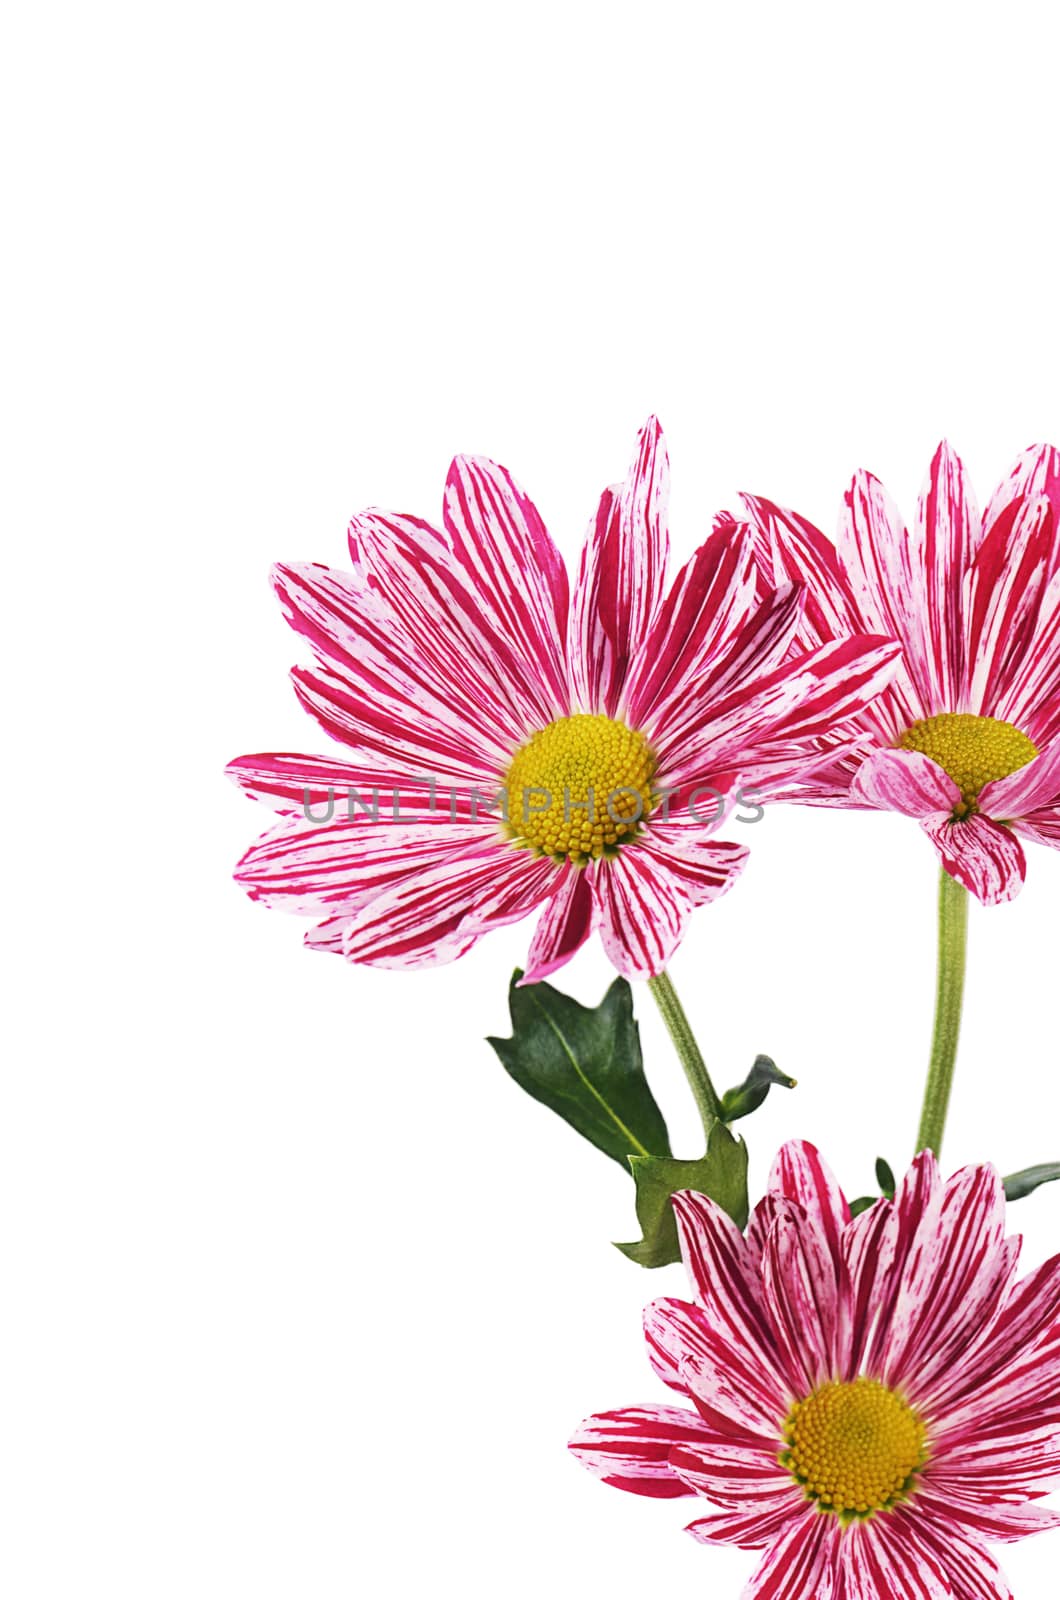 Flower pink chrysanthemums on isolated white background